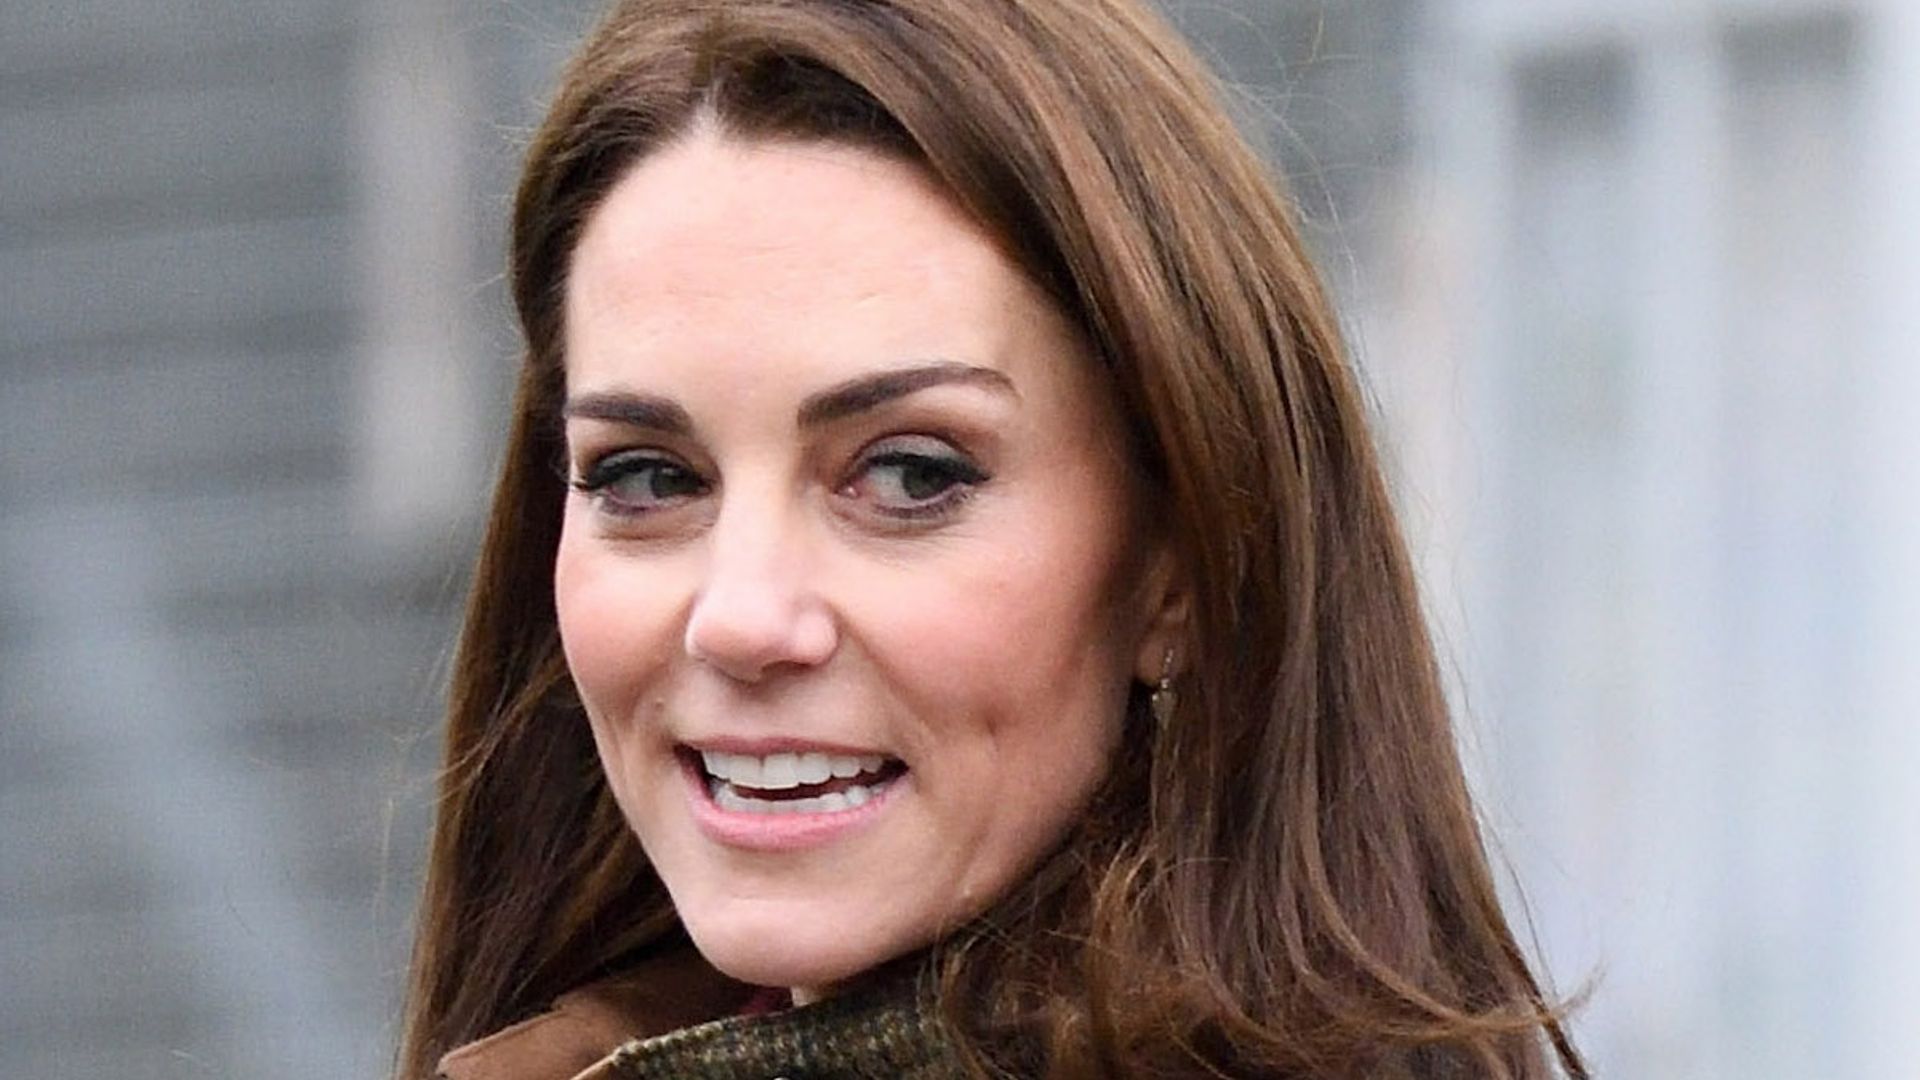 Kate Middleton rocks sleek hairstyle as she's pictured in London | HELLO!